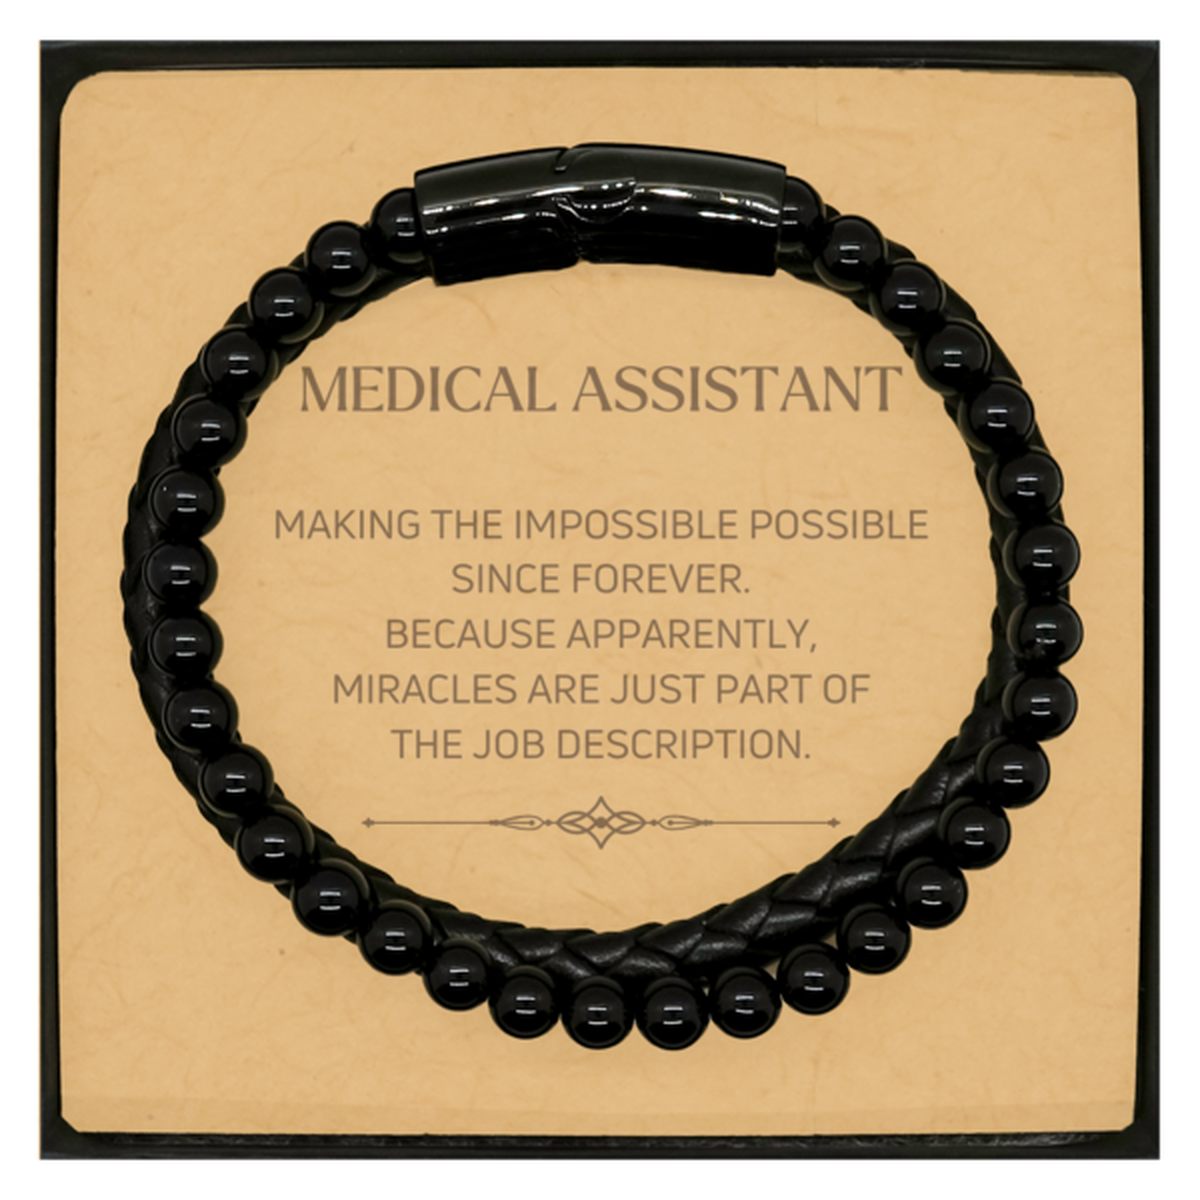 Funny Medical Assistant Gifts, Miracles are just part of the job description, Inspirational Birthday Christmas Stone Leather Bracelets For Medical Assistant, Men, Women, Coworkers, Friends, Boss